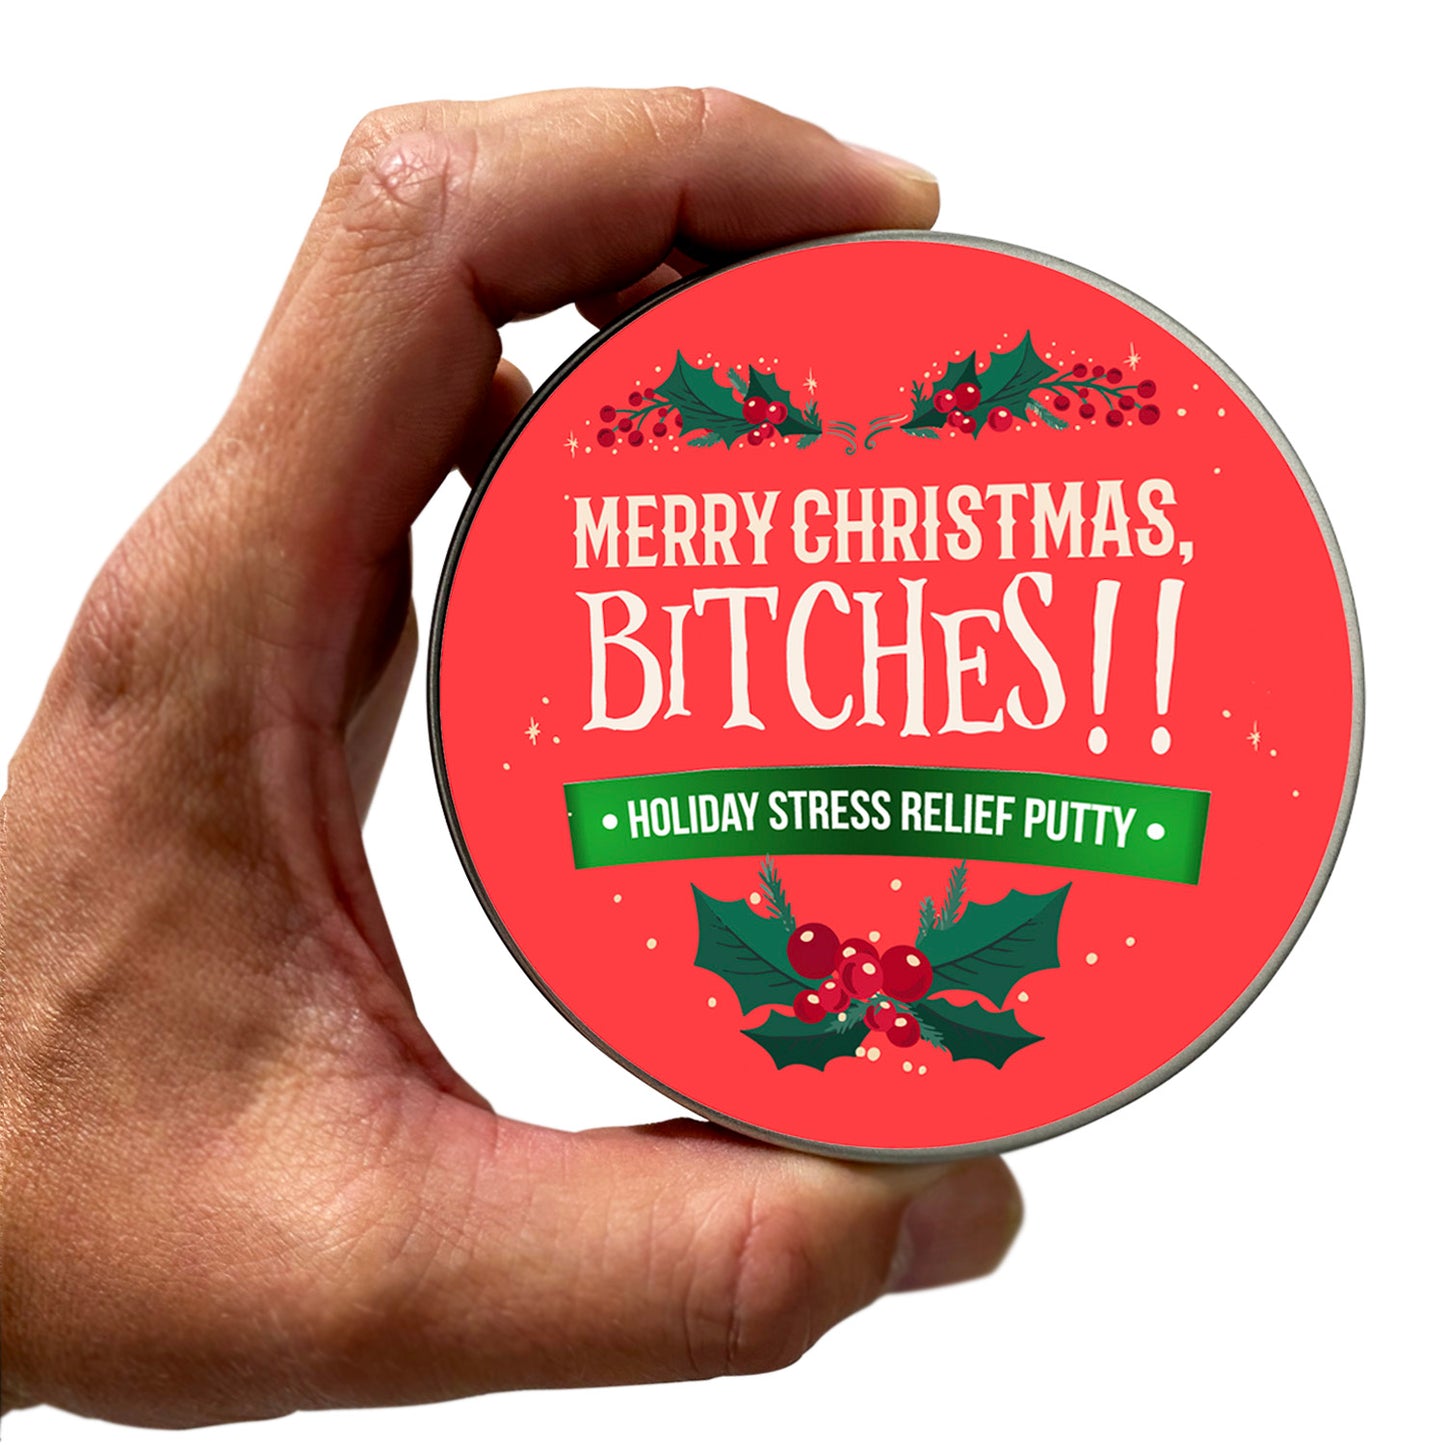 Merry Christmas, Bitches Putty